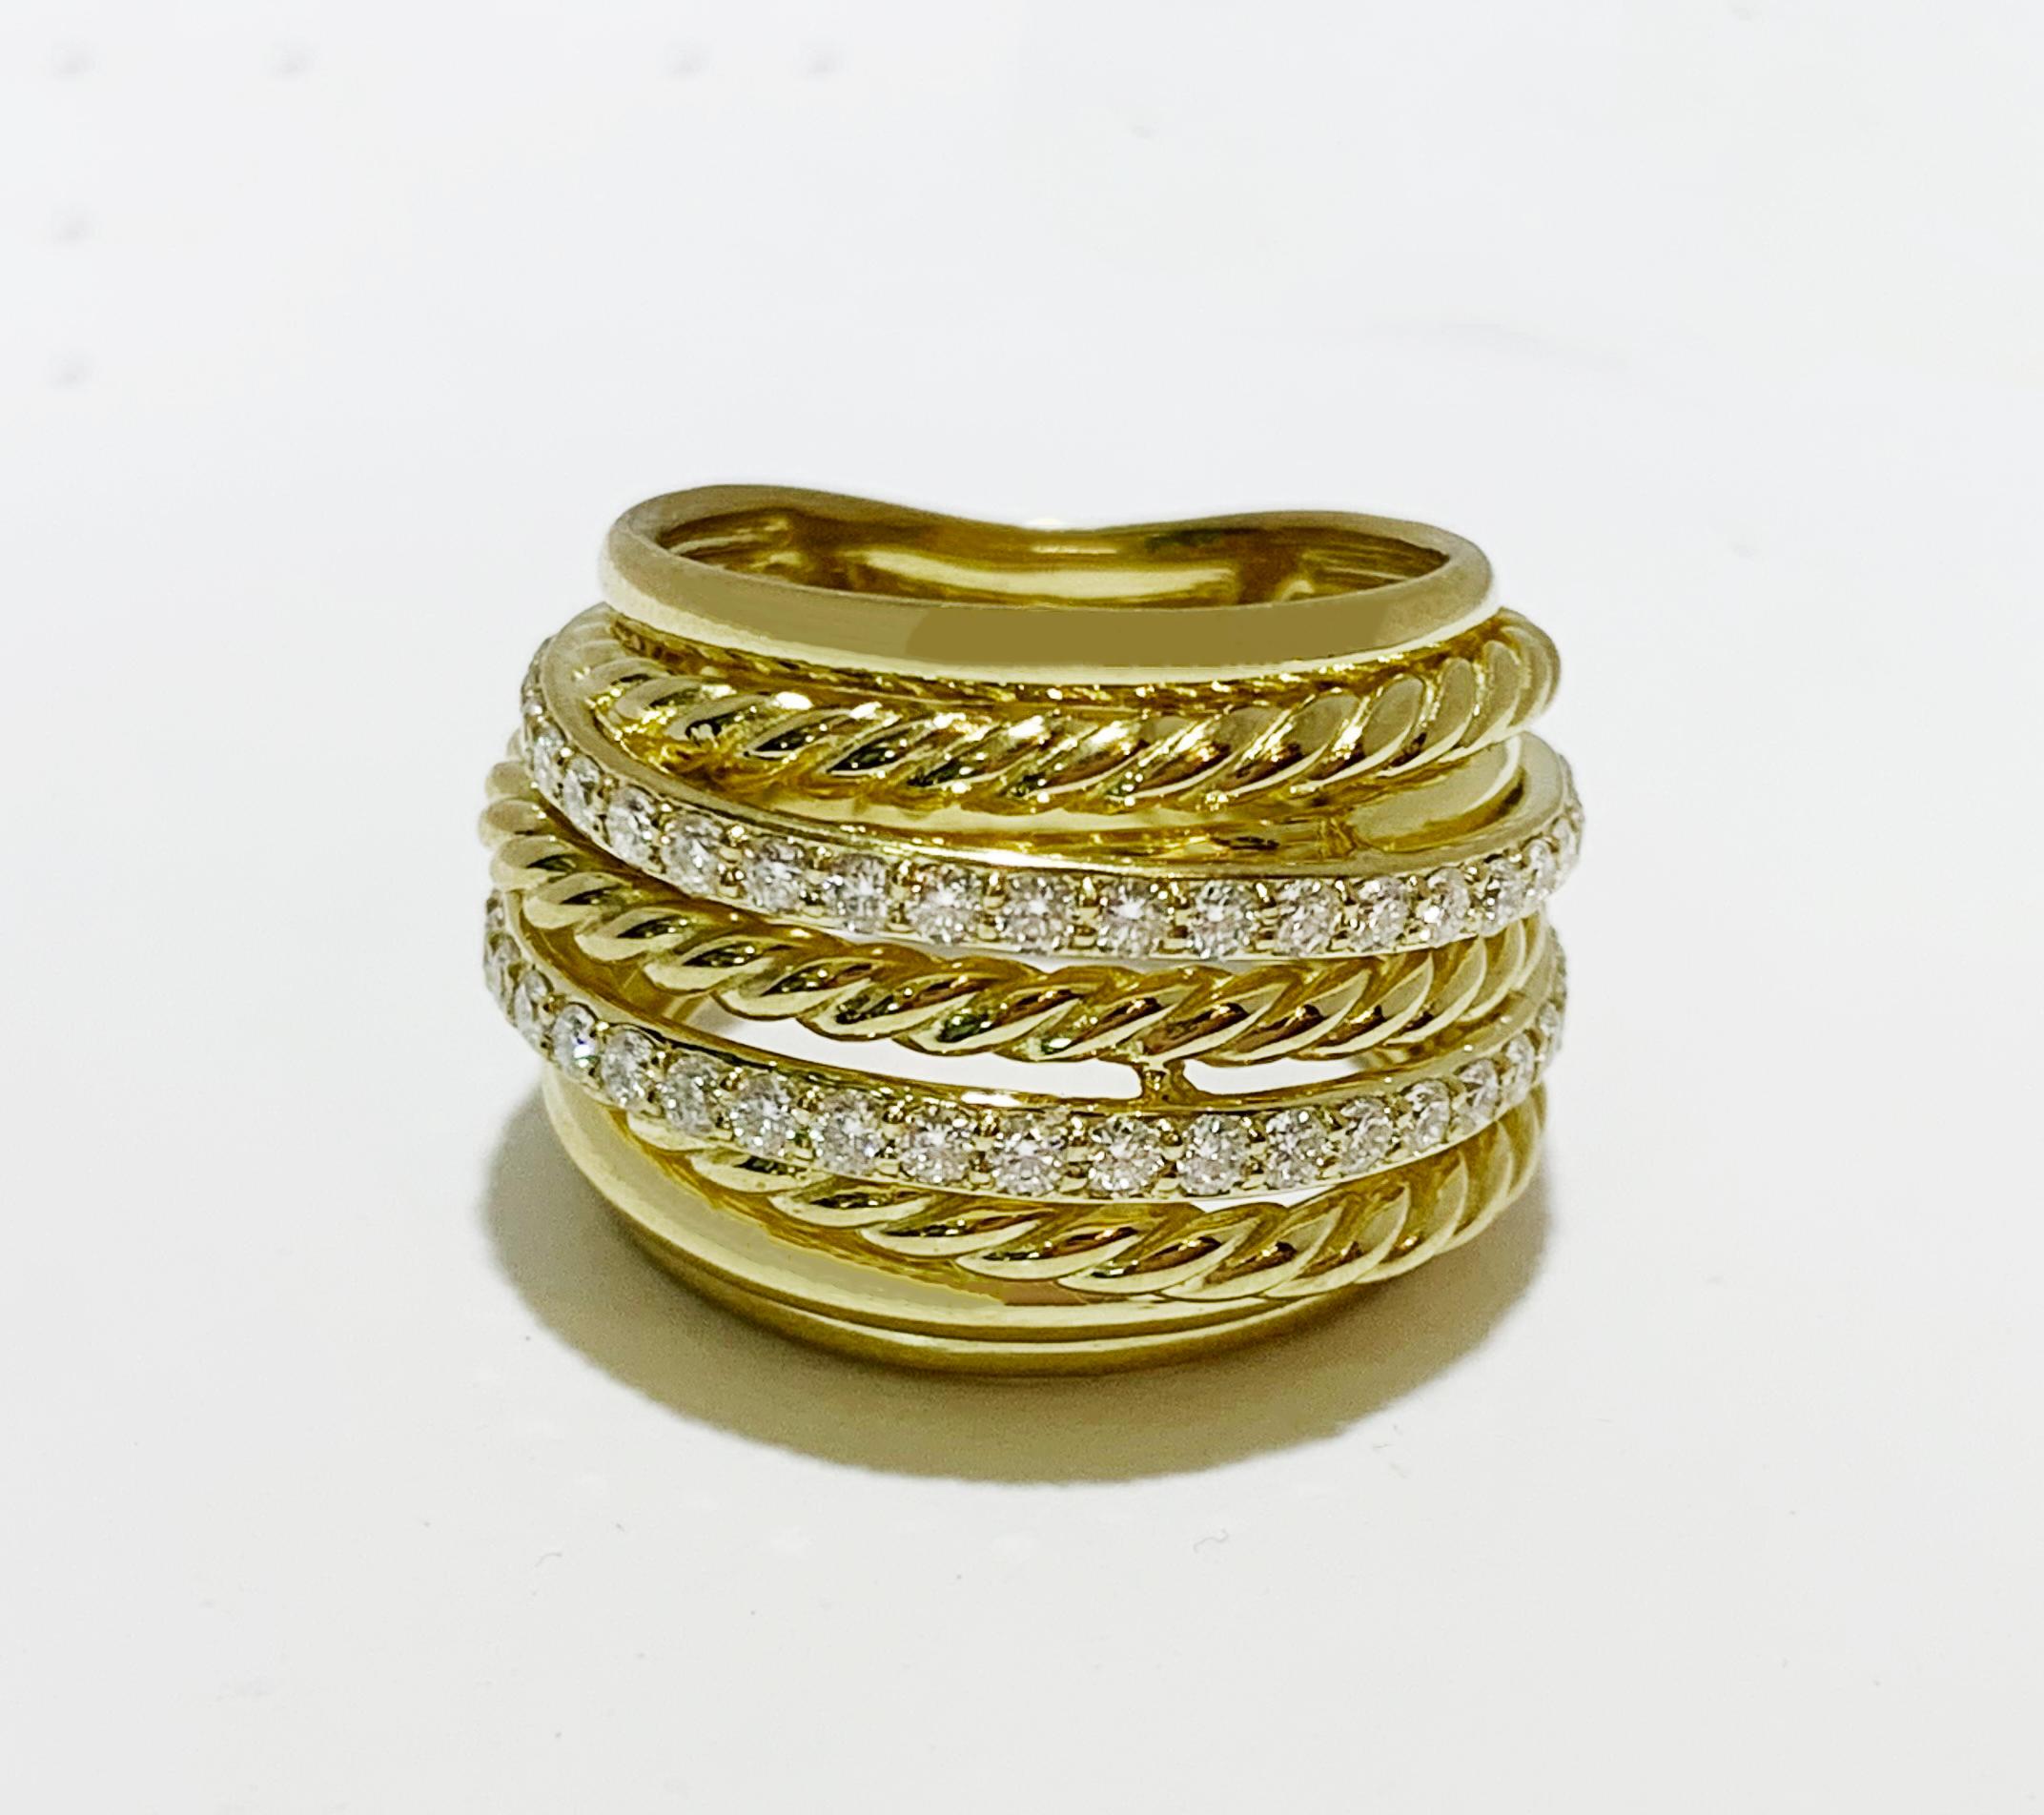 The Crossover Collection
-18 k Yellow Gold
-Ring size: 4.5
-Ring width: 0.3-0.7”
-Diamond: 0.67 ct
 *New, no tags
Comes with David Yurman box
Retail: $5200